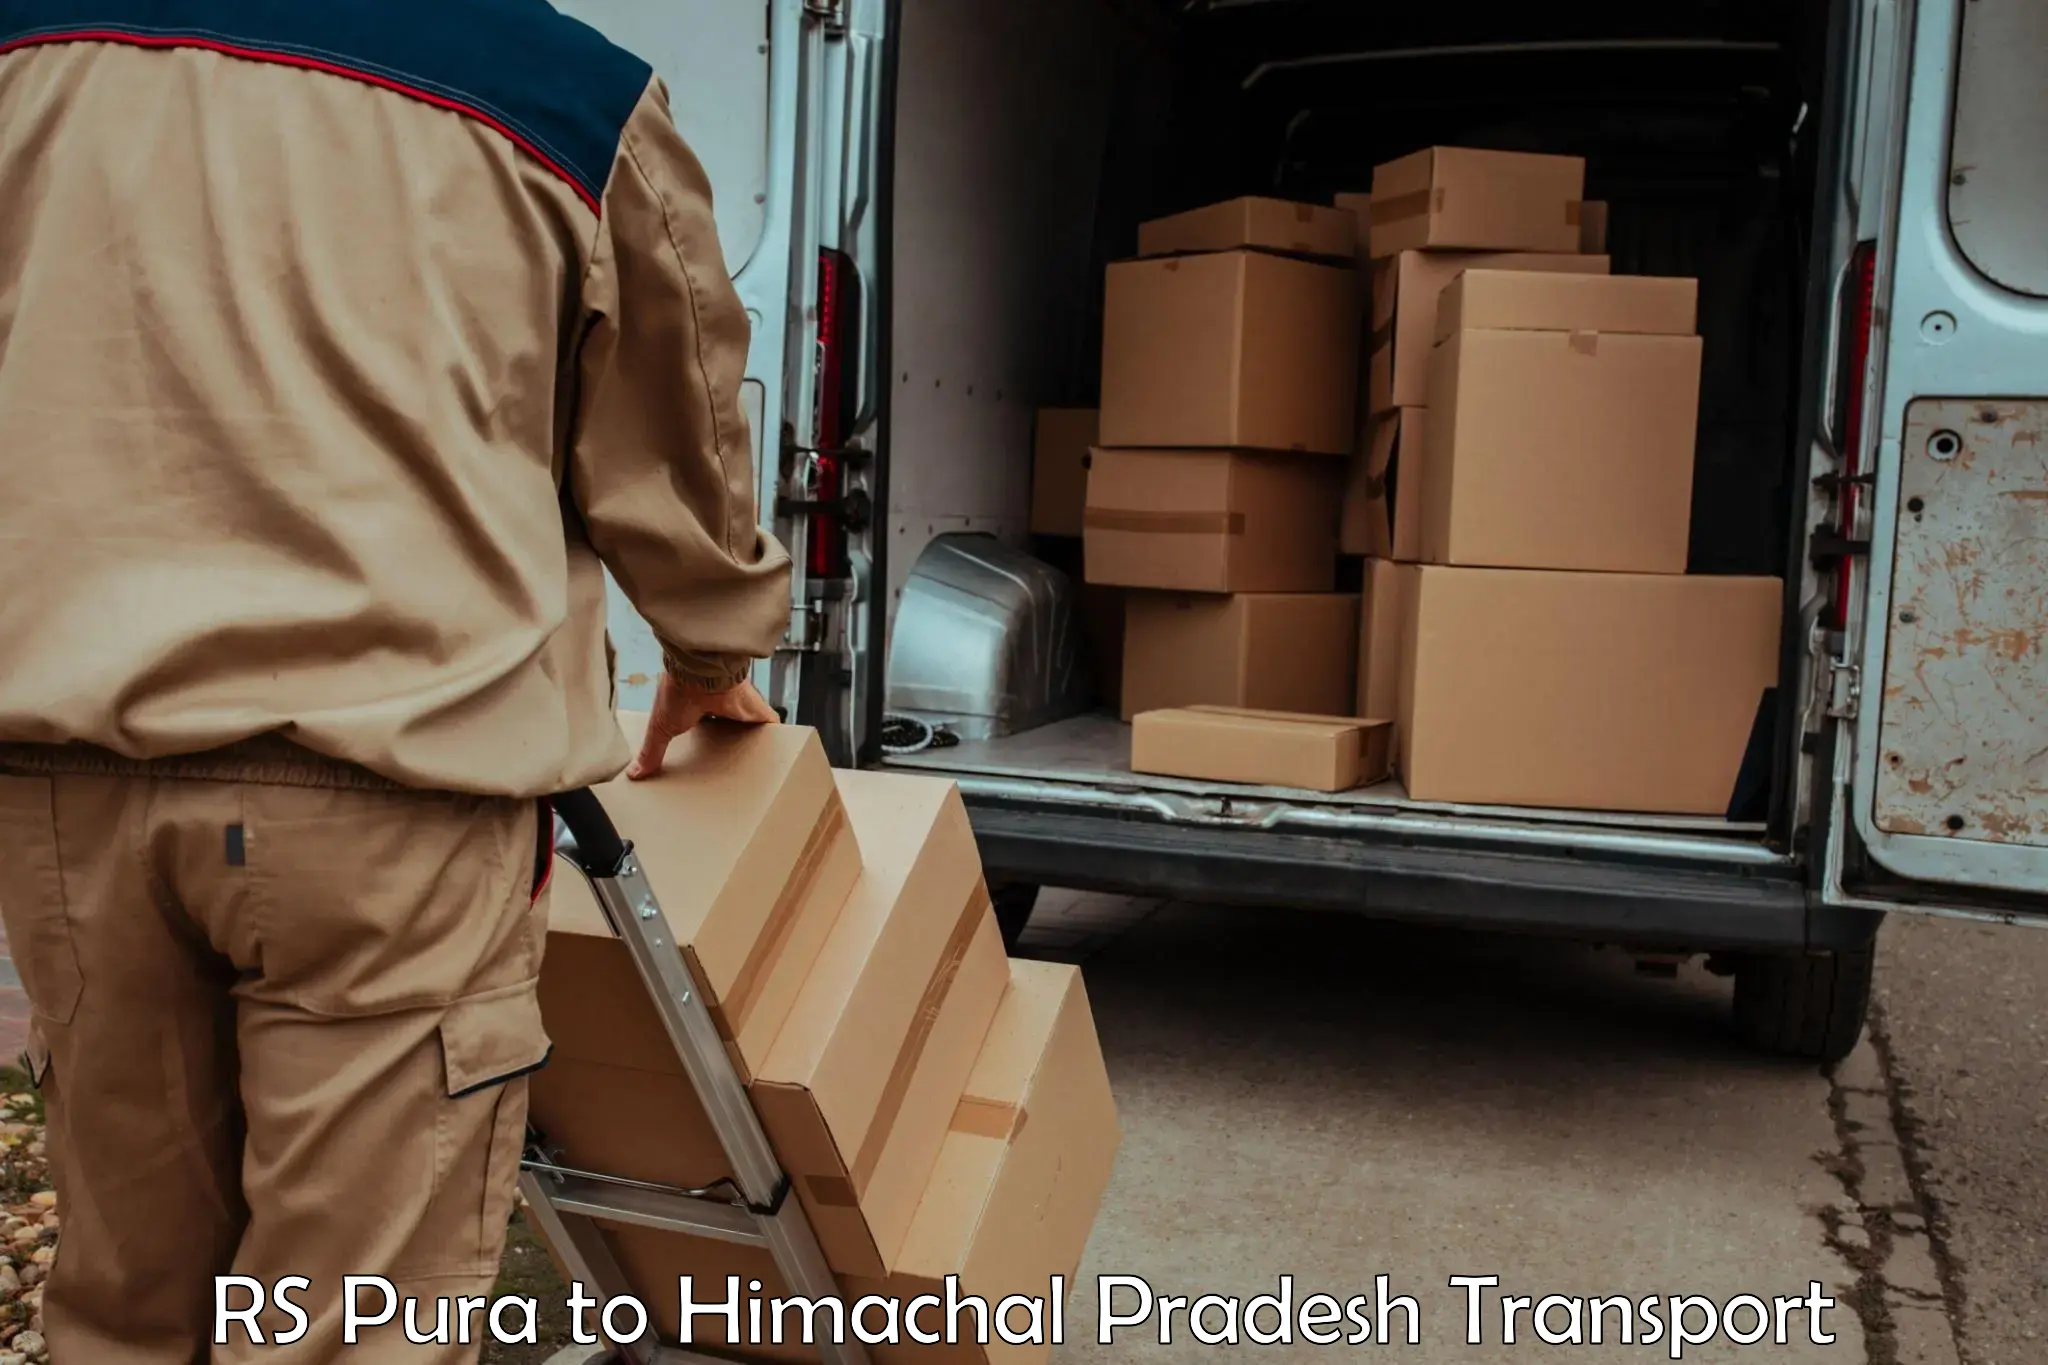 Nationwide transport services RS Pura to Himachal Pradesh